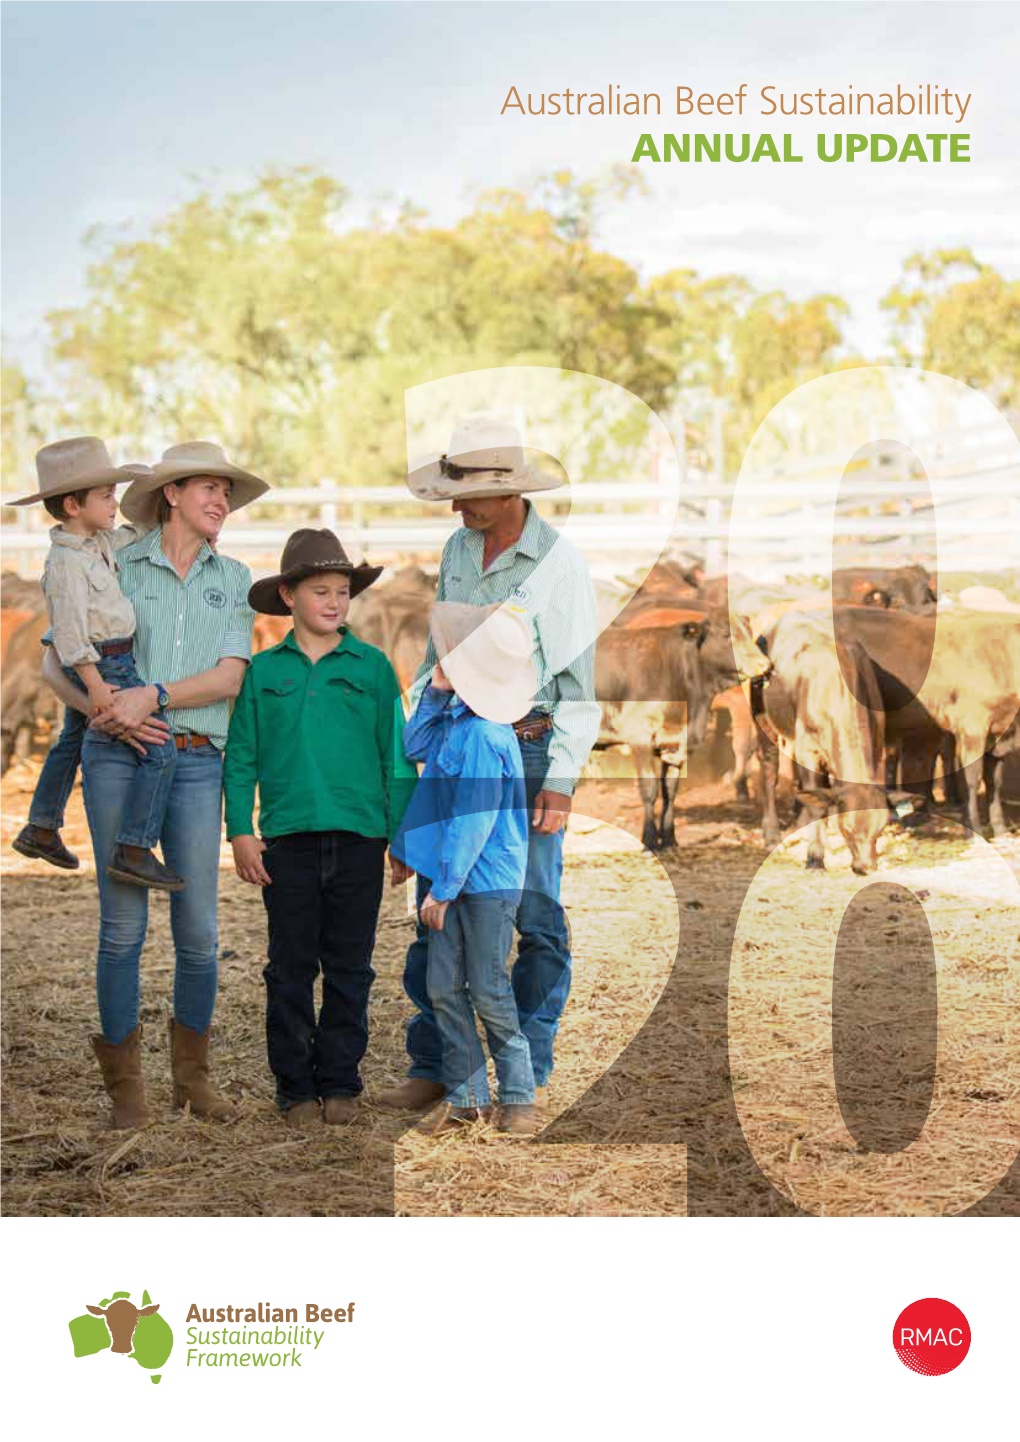 ABSF 2020 Australian Beef Sustainability Annual Update